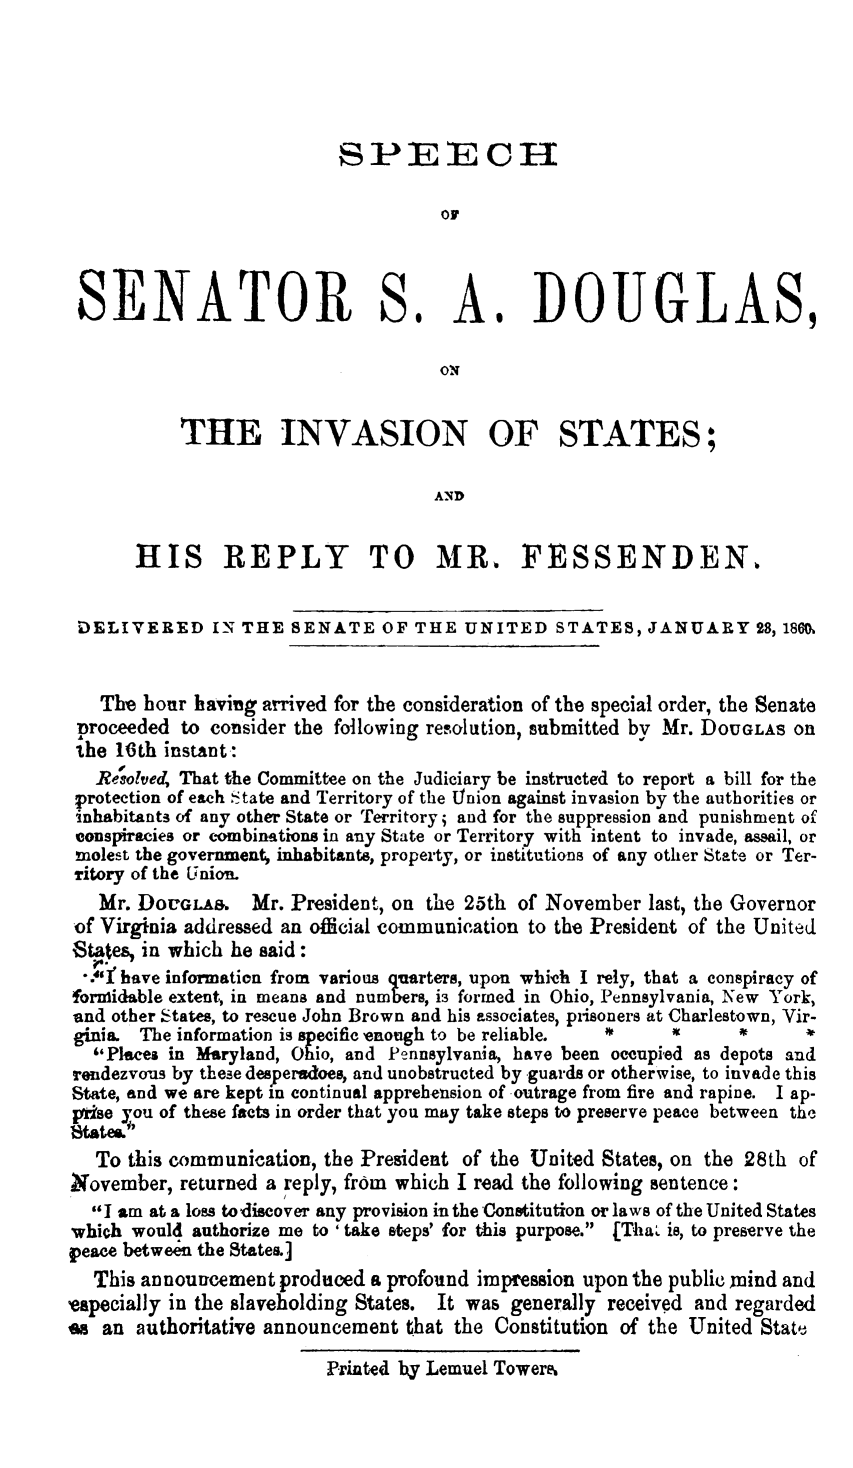 handle is hein.slavery/sssadis0001 and id is 1 raw text is: 





                           SPEECH






 SENATOR S. A. DOUGLAS,

                                     OIN


           THE INVASION OF STATES;

                                    AN D


       HIS REPLY TO MR. FESSENDEN.


 DELIVERED IN THE SENATE OF THE UNITED STATES, JANUARY 28, 180(M


   The hour having arrived for the consideration of the special order, the Senate
 proceeded to consider the following resolution, submitted by Mr. DOUGLAS OB
 the 16th instant:
   Resolved, That the Committee on the Judiciary be instructed to report a bill for the
 protection of each State and Territory of the union against invasion by the authorities or
 inhabitants of any other State or Territory; and for the suppression and punishment of
 conspiracies or combinations in any State or Territory with intent to invade, assail, or
 molest the government, inhabitants, property, or institutions of any other State or Ter-
 Titory of the Union.
   Mr. DOUGLAS.   Mr. President, on the 25th of November  last, the Governor
 of Virginia addressed an official communication to the President of the United
 States, in which he said:
 *.i have information from various quarters, upon which I rely, that a conspiracy of
 formidable extent, in means and numbers, is formed in Ohio, Pennsylvania, New York,
 and other States, to rescue John Brown and his associates, prisoners at Charlestown, Vir-
 ginia. The information is specifice enough to be reliable. *            *
   Places in Maryland, Ohio, and Pennsylvania, have been occupied as depots and
rendezvous by these desperadoes, and unobstructed by guards or otherwise, to invade this
State, and we are kept in continual apprehension of outrage from fire and rapine. I ap-
pirse you of these facts in order that you may take steps to preserve peace between the
tStates.i
   To this communication, the President of the United States, on the 28th of
November,  returned a reply, from which I read the following sentence:
  I am at a loss todiscover any provision in the Constitution or laws of the United States
which would authorize me to 'take steps' for this purpose. [Tha is, to preserve the
peace between the States.]
   This announcement produced a profound impression upon the public mind and
especially in the slaveholding States. It was generally received and regarded
es an  authoritative announcement that the Constitution of the United State,

                          Printed by Lemuel Tower.


